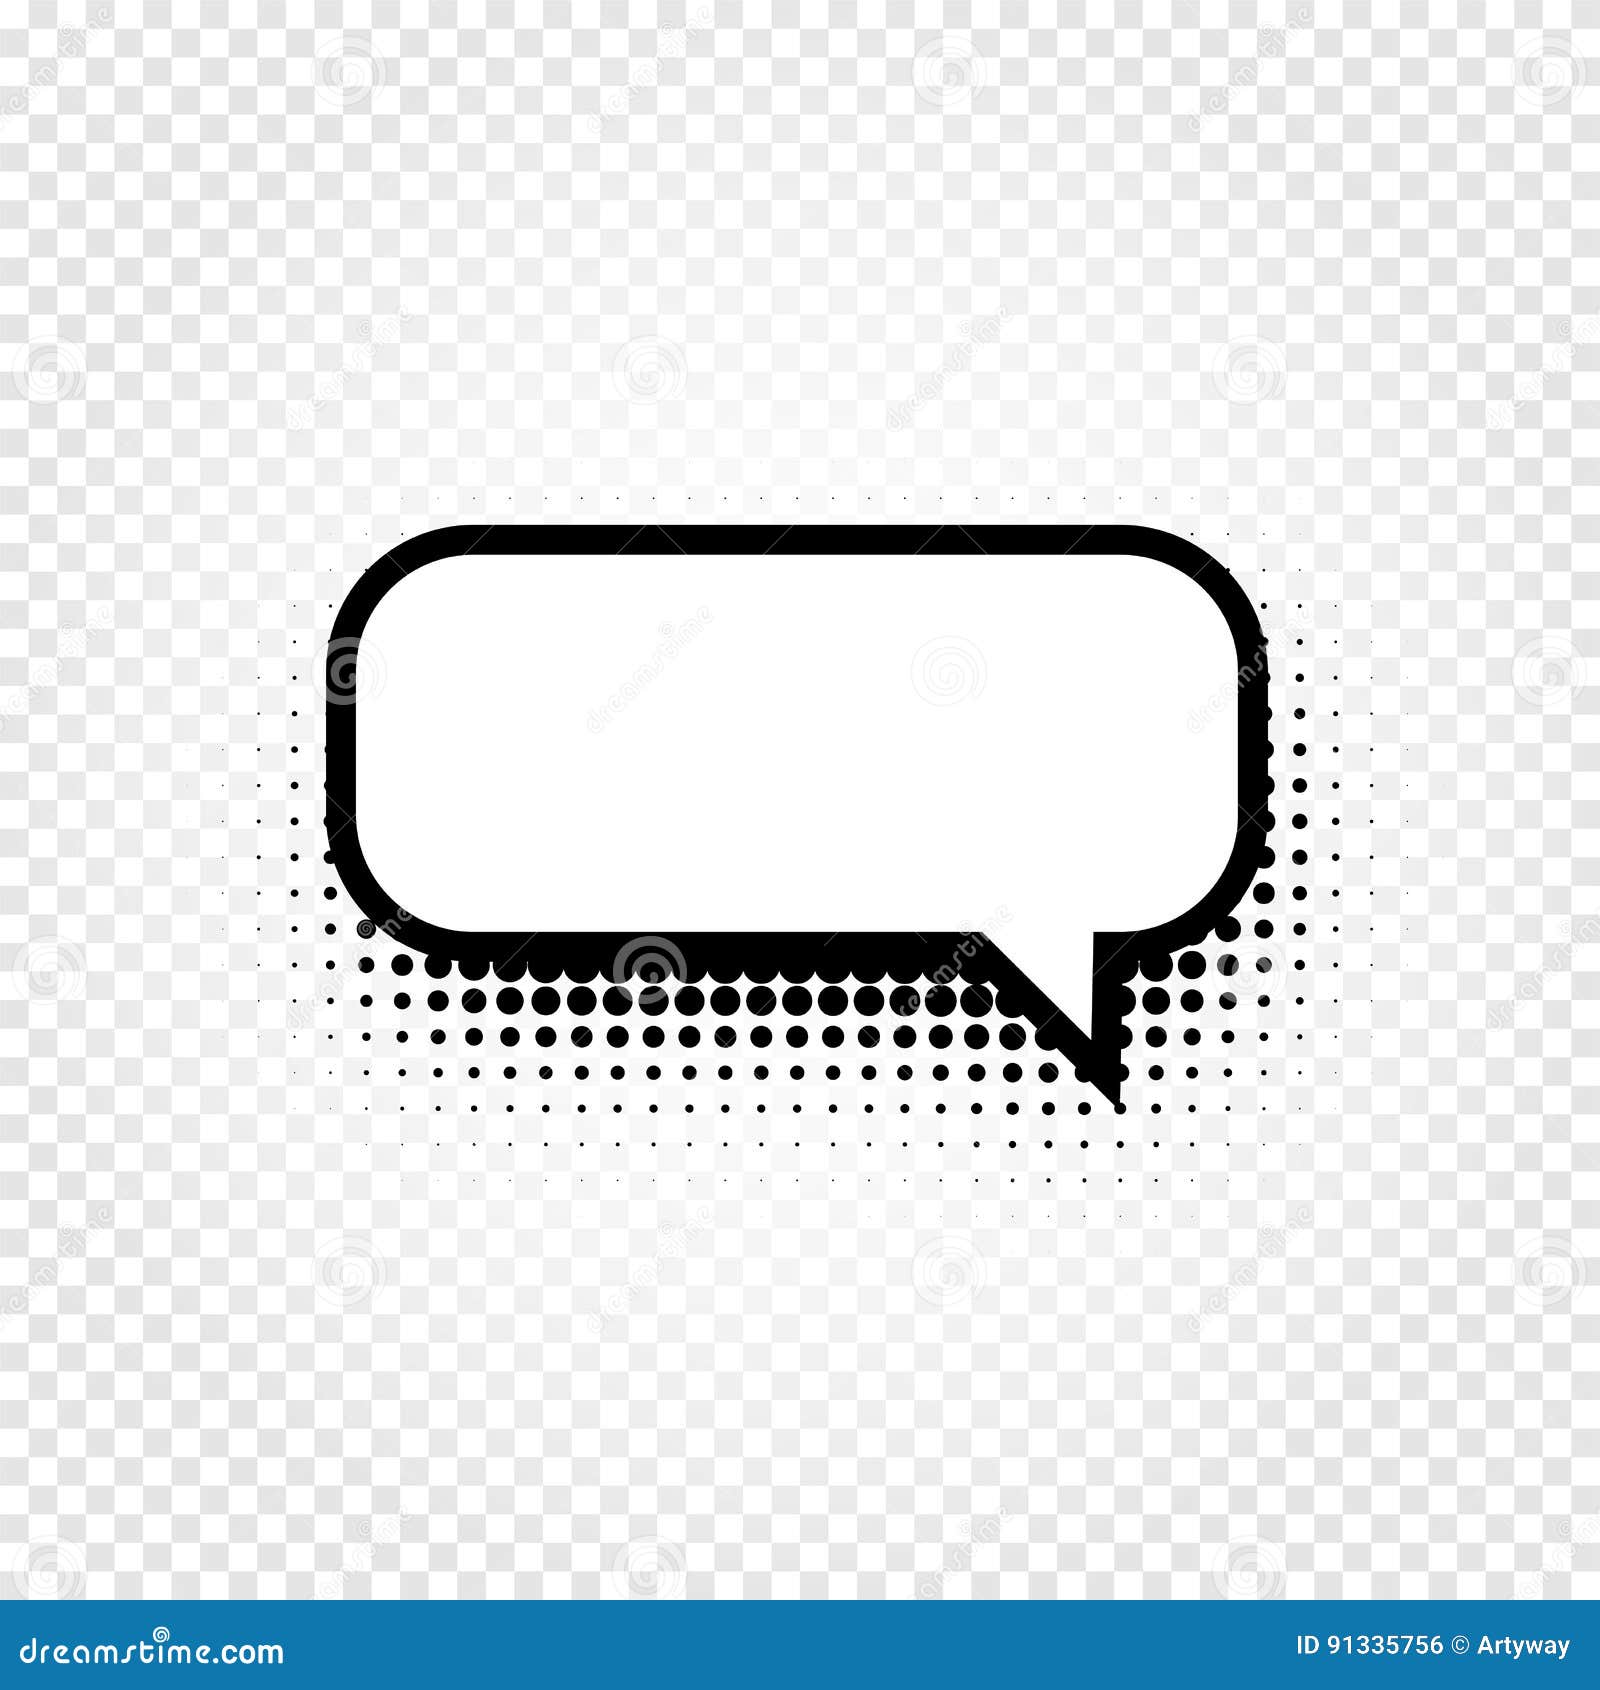  abstract black and white color comic speech balloon icon on checkered background, dialogue box sign, dialog